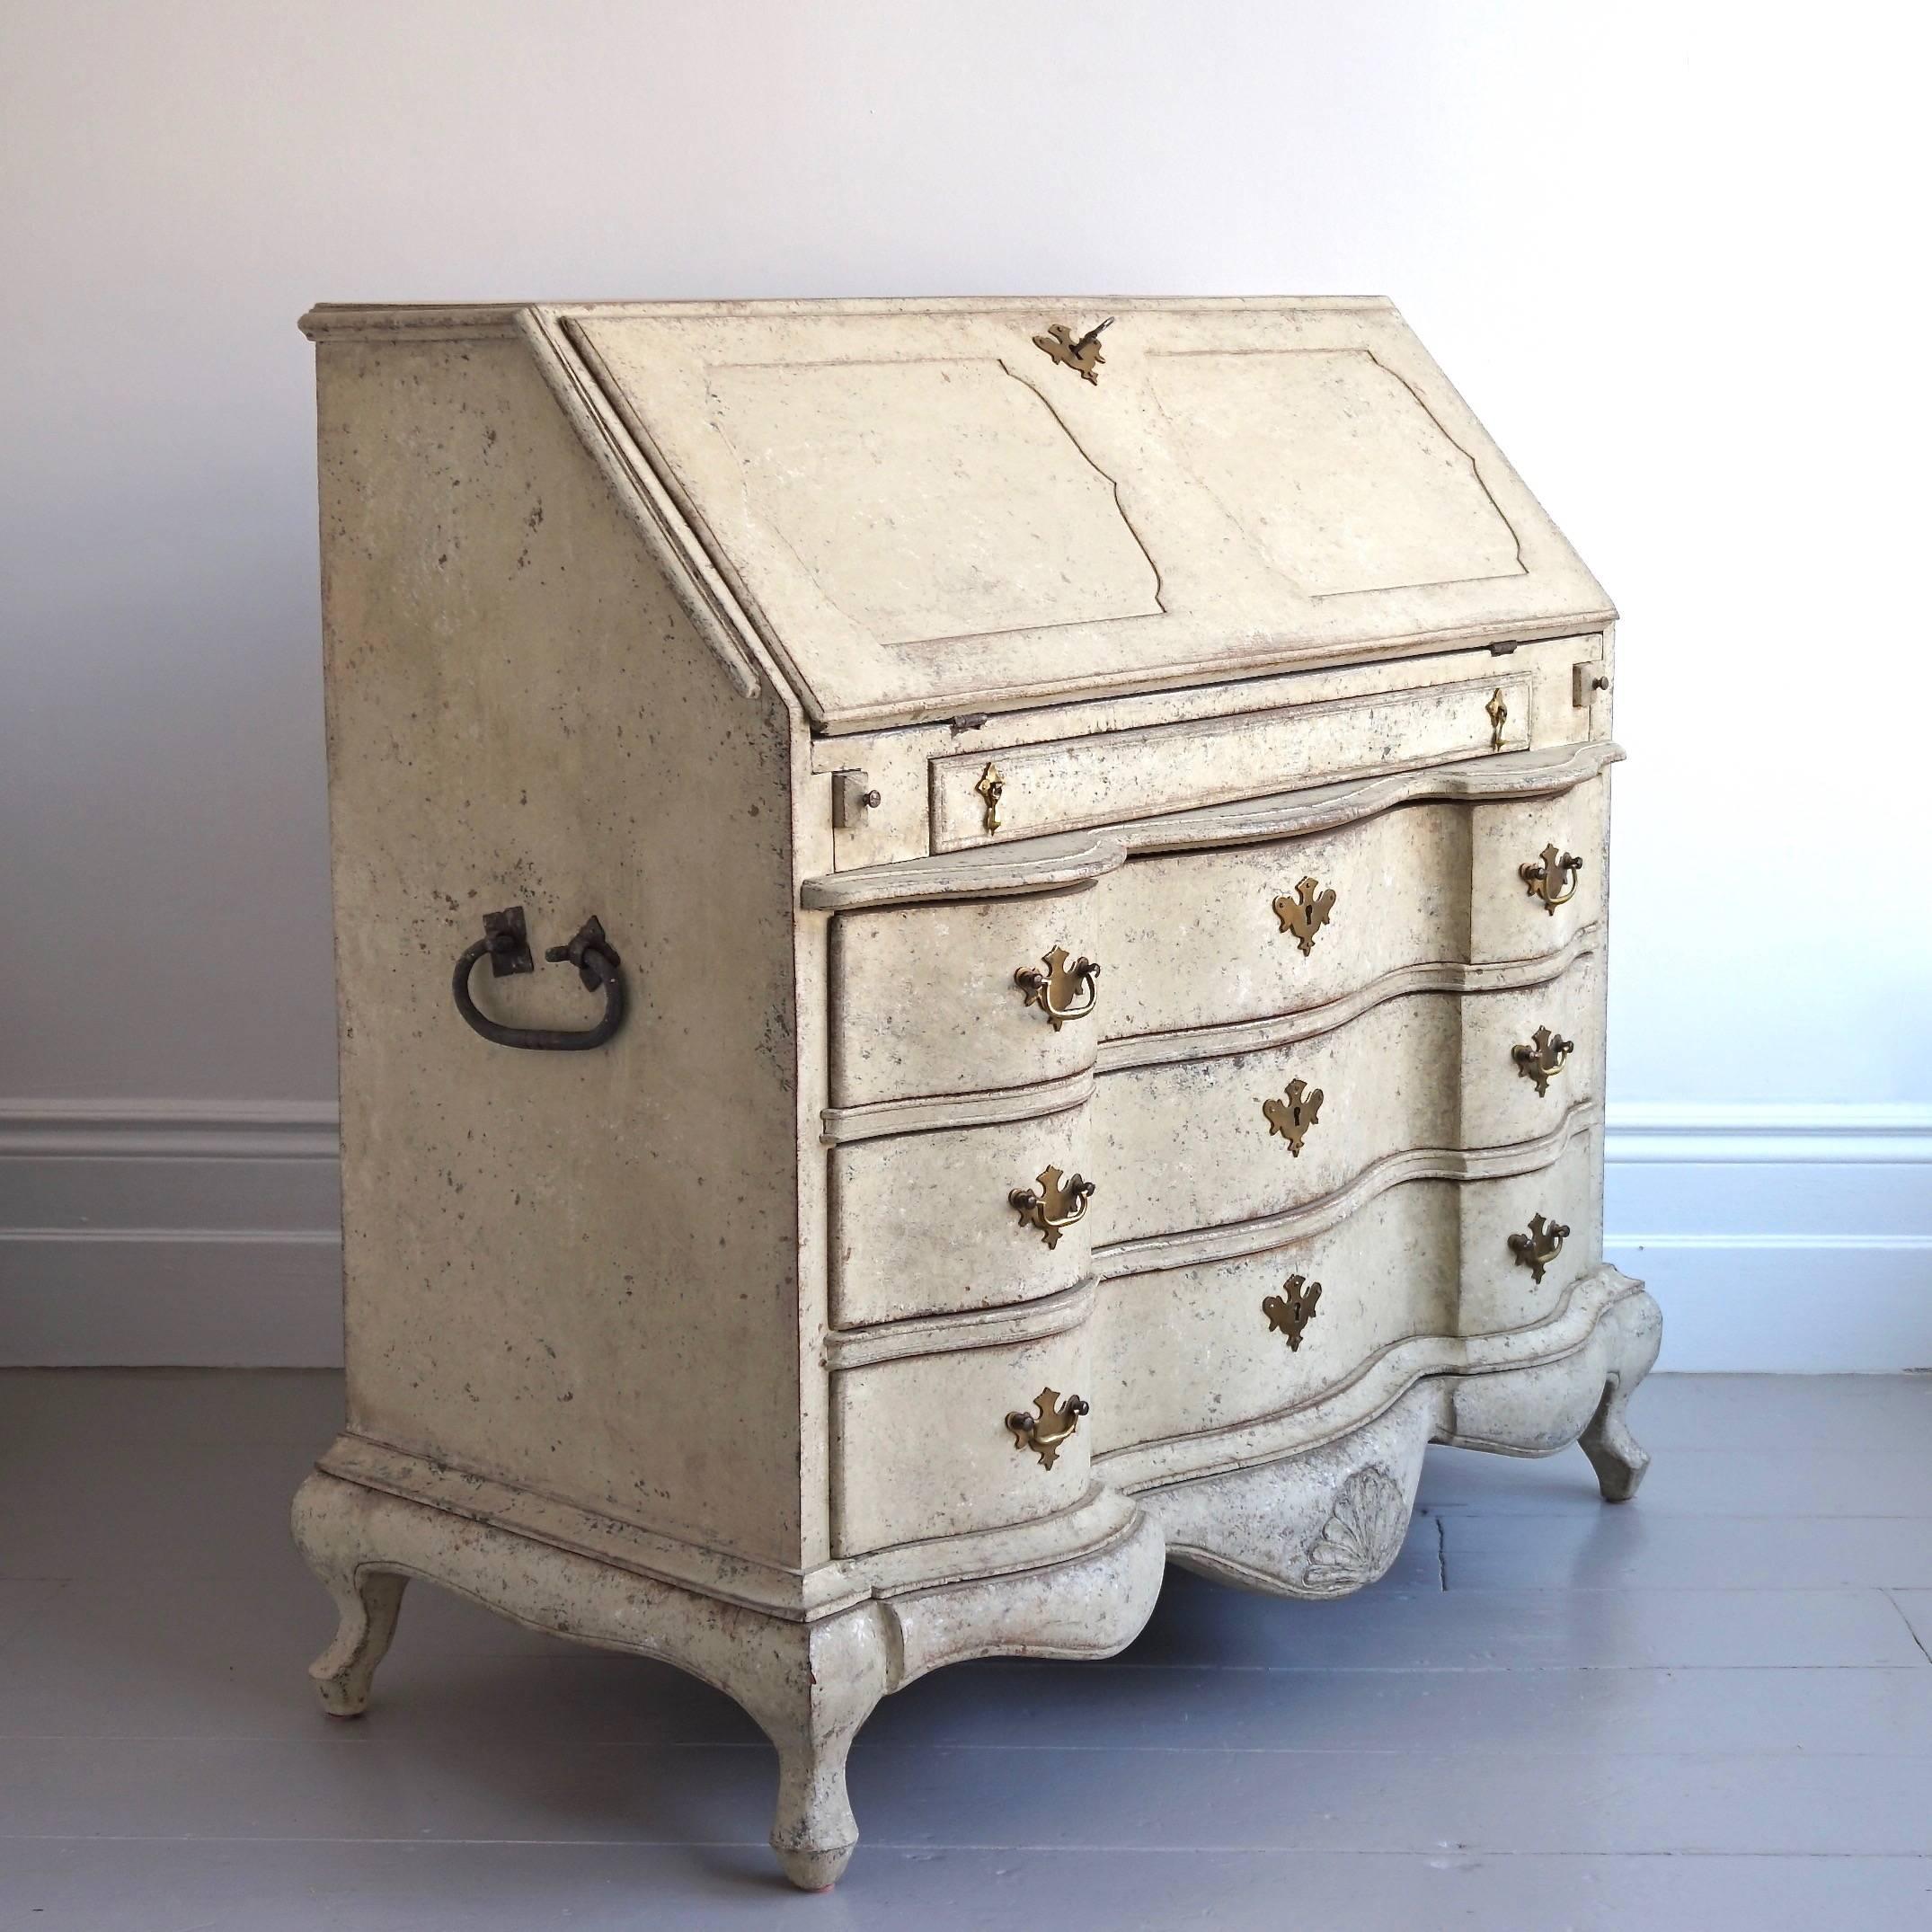 A stunning Baroque bureau with an outstanding antique patina. The bureau features a decorative inset panelled desk lid concealing a beautiful interior with curved drawers and secret compartments, a slim letter drawer over three hand carved